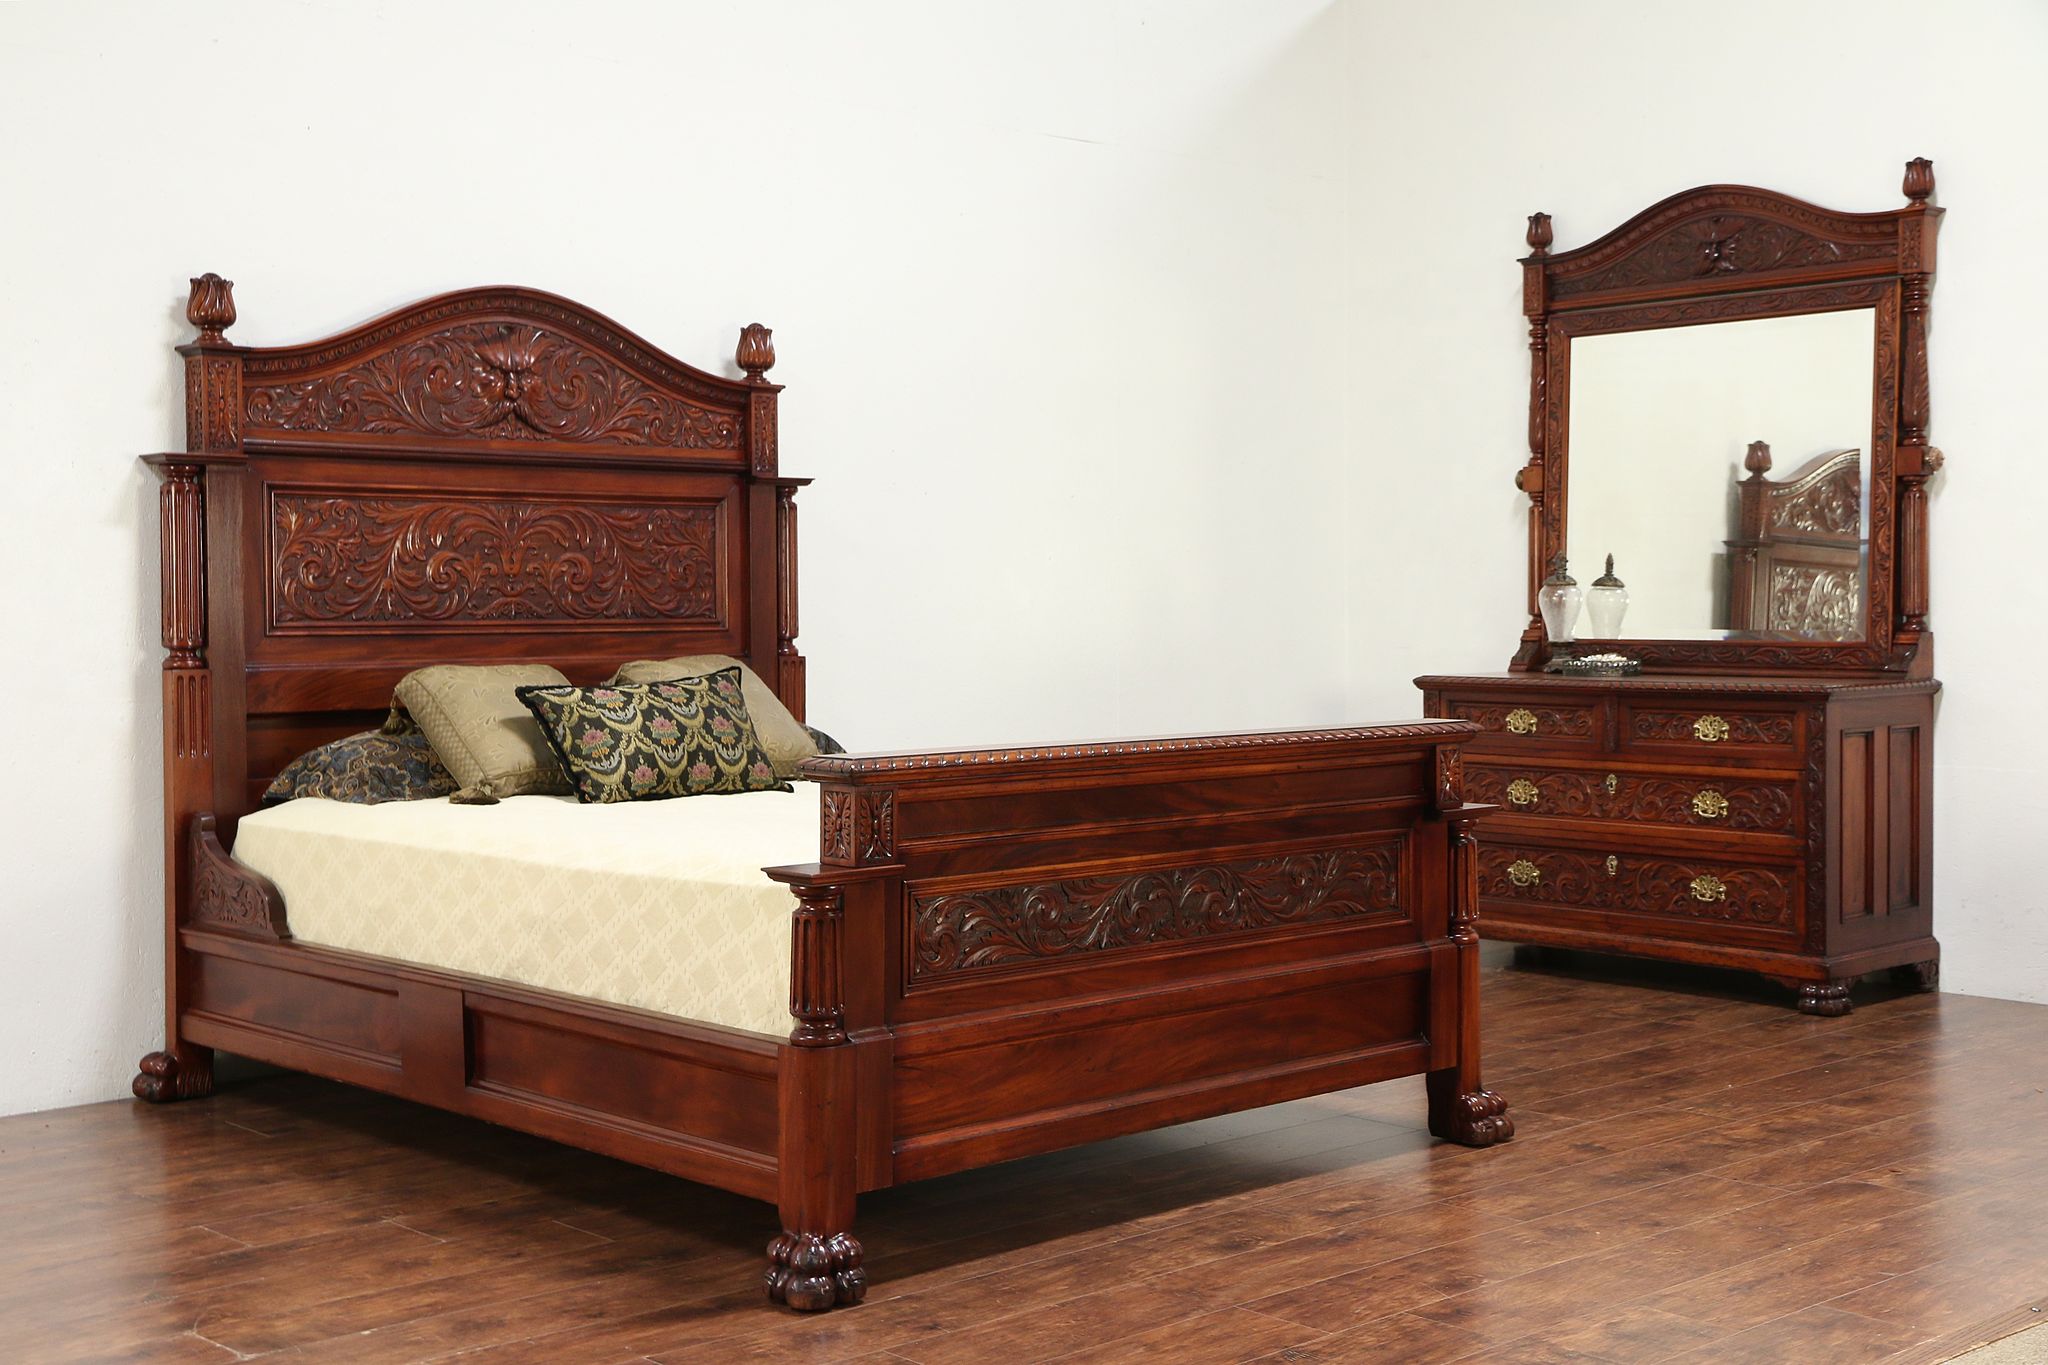 Hand Carved Antique Mahogany Queen Size, Antique Mahogany Bed Frame